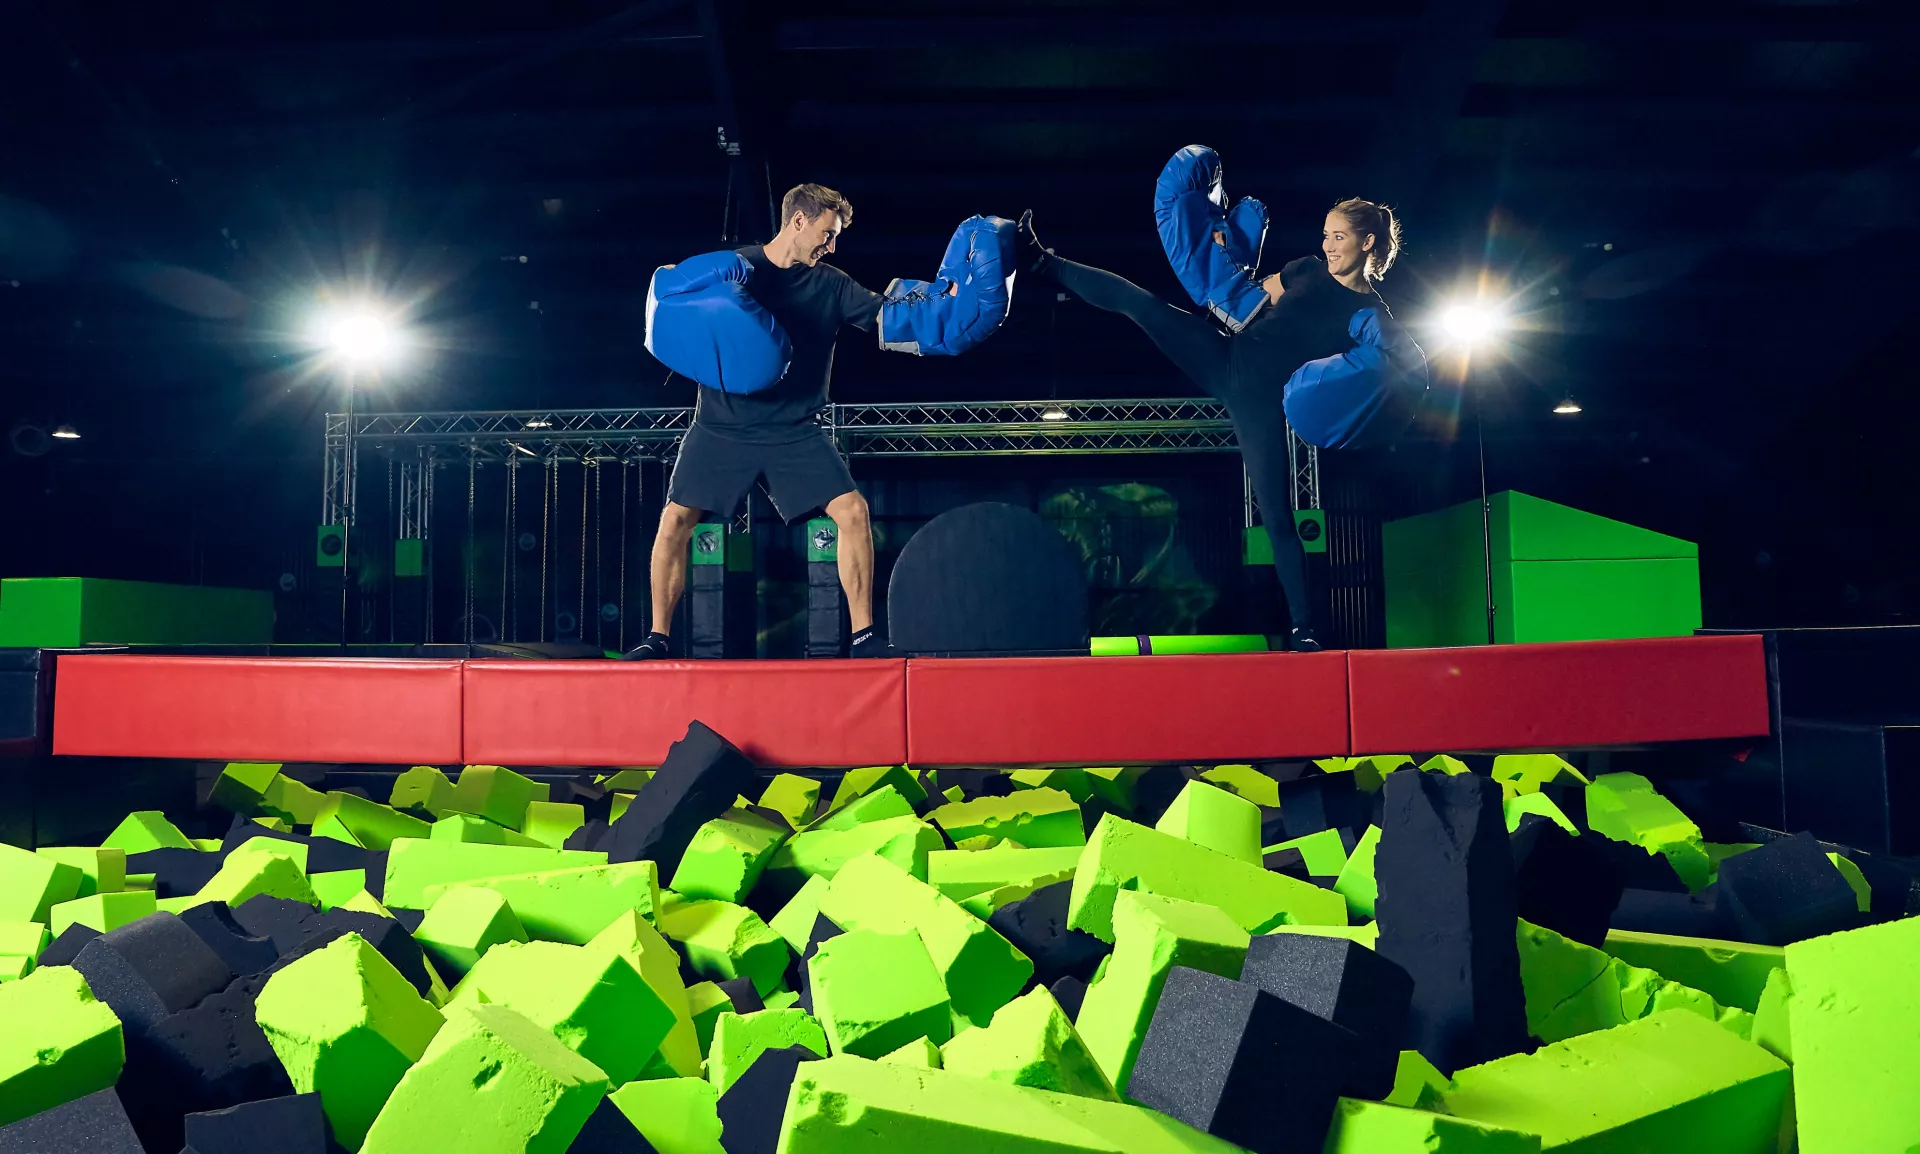 Velcro Wall/Spider Wall - Indoor Trampoline Park Attraction, Attractions